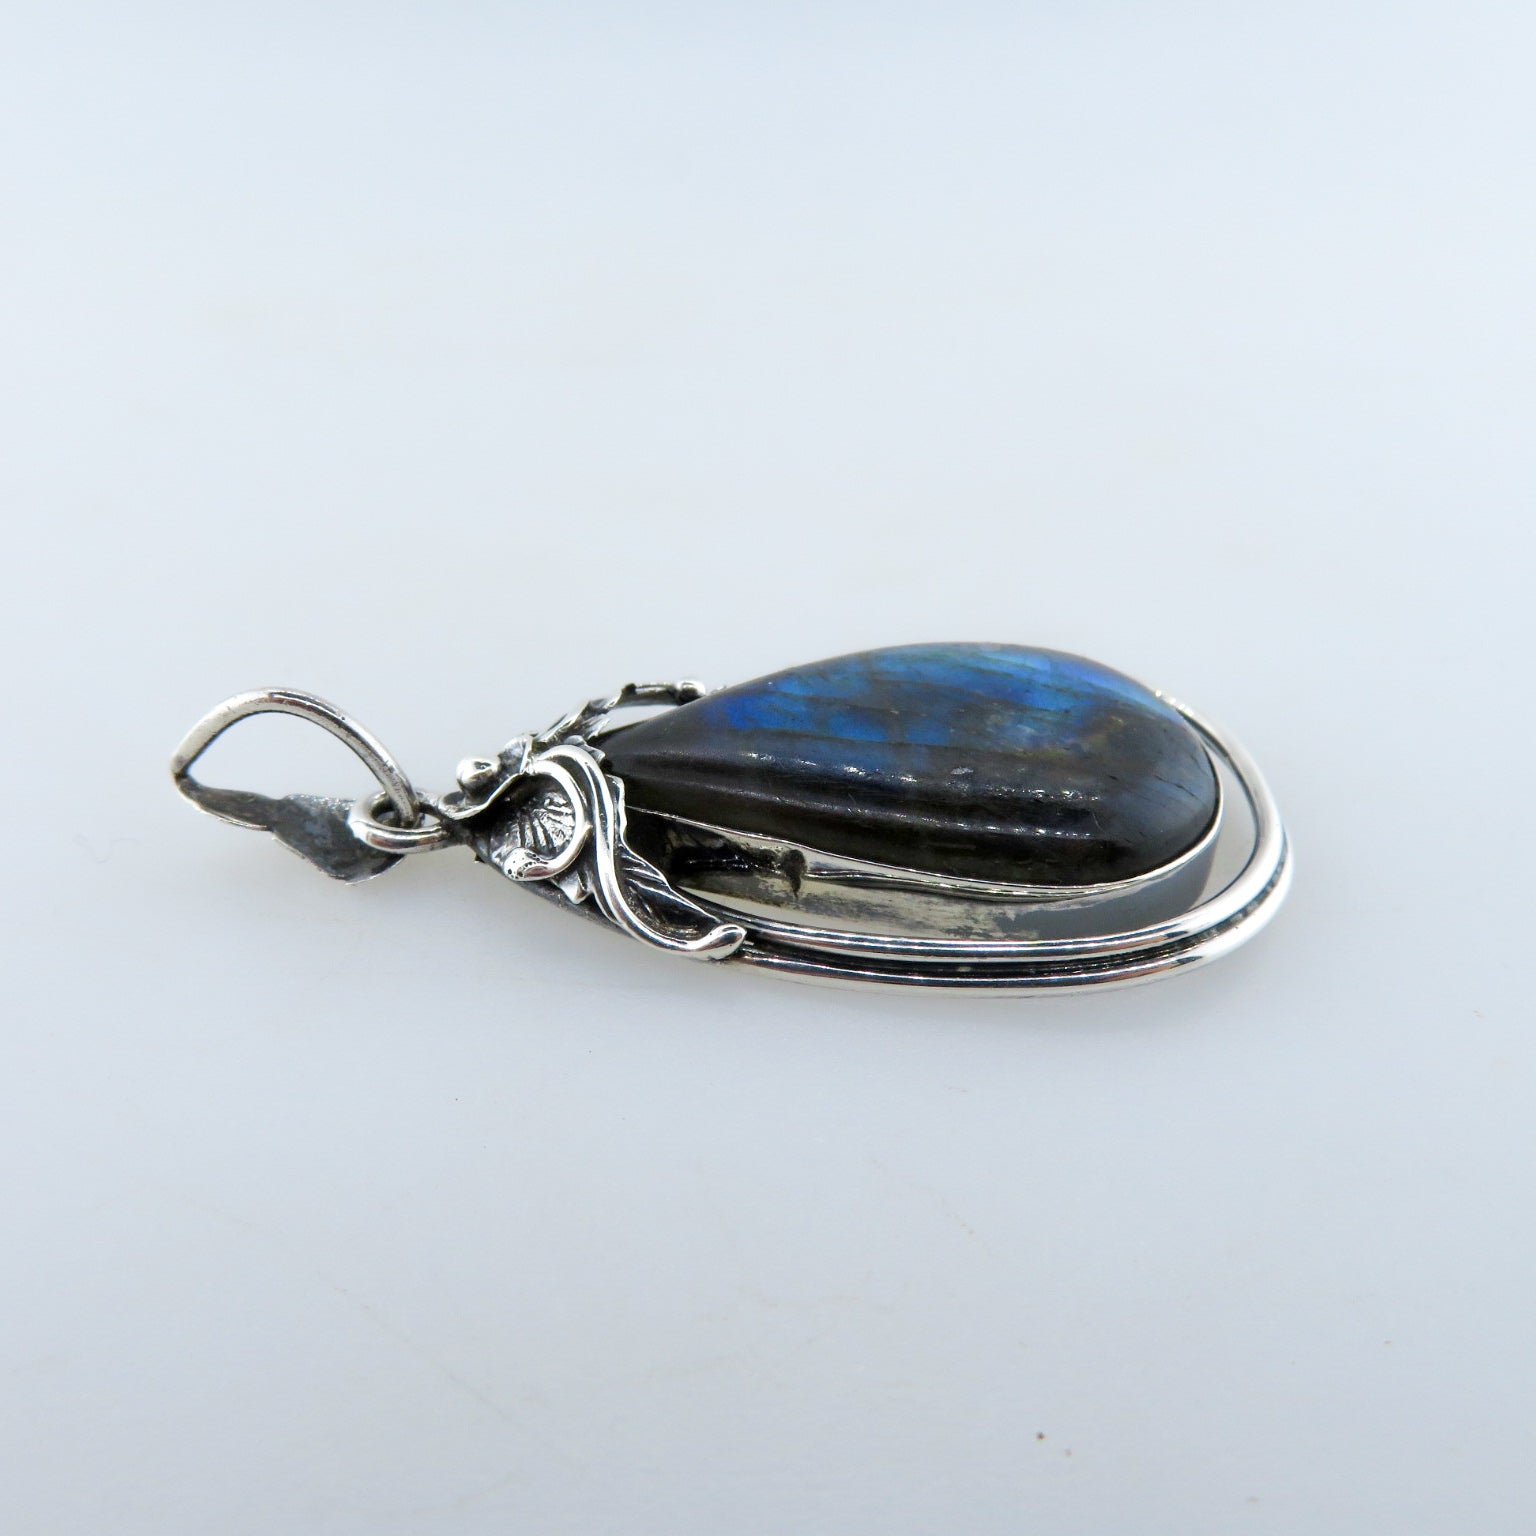 Labradorite Pendant with Sterling Silver